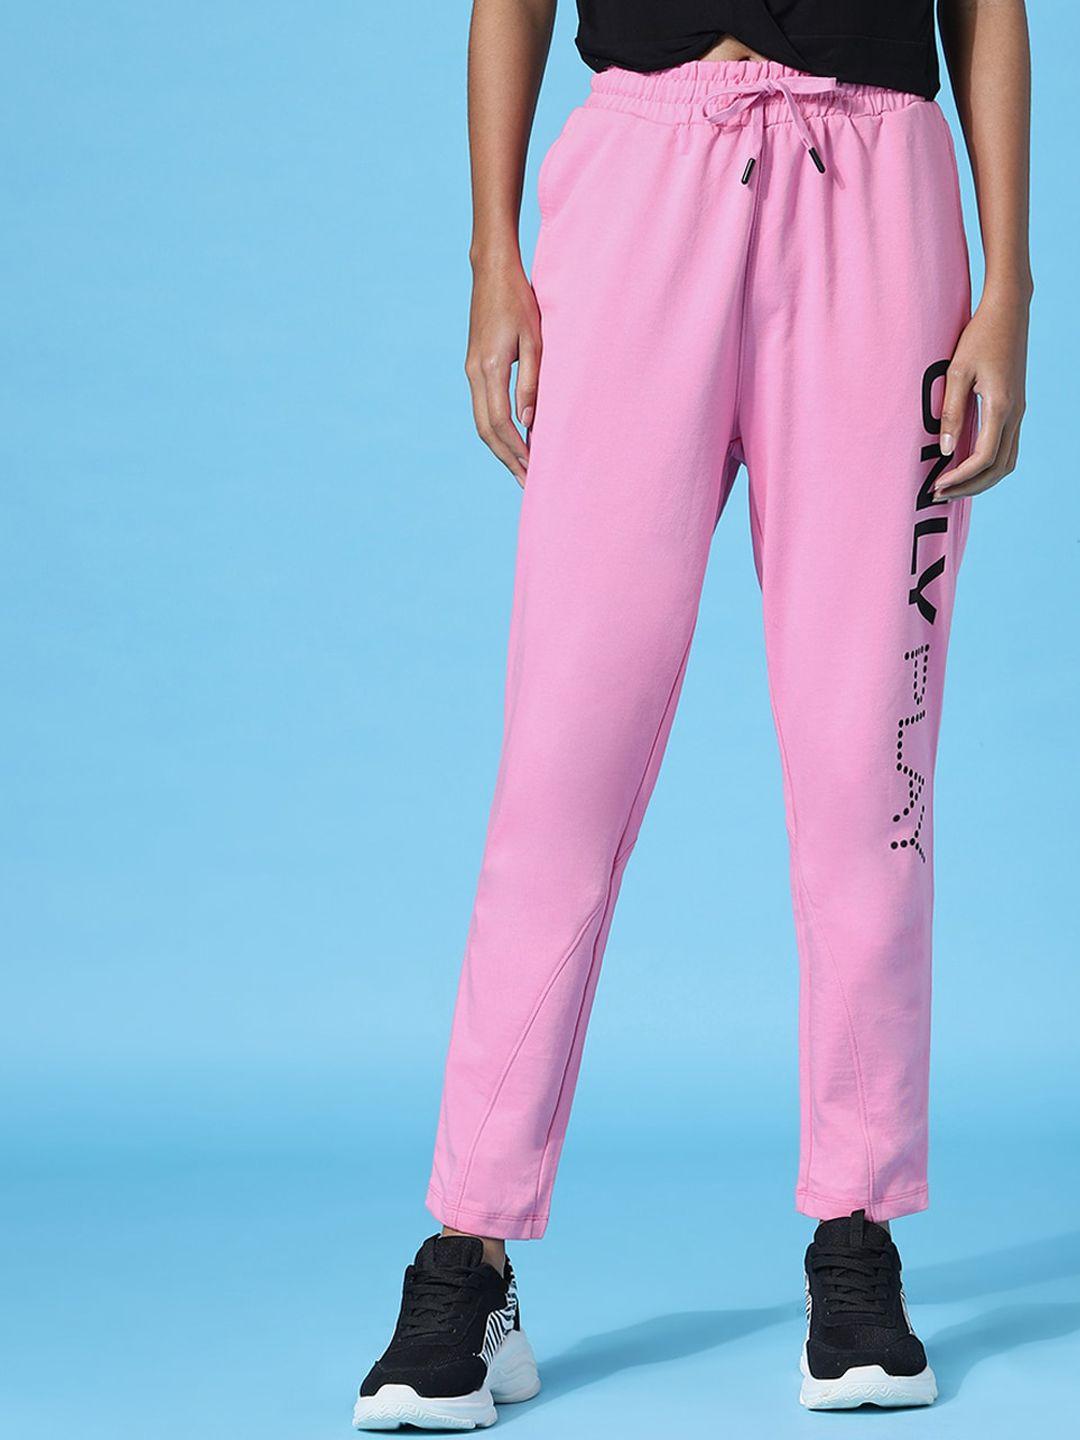 only-play-women-pink-solid-cotton-track-pants-onlpwhoosh-joggers-j